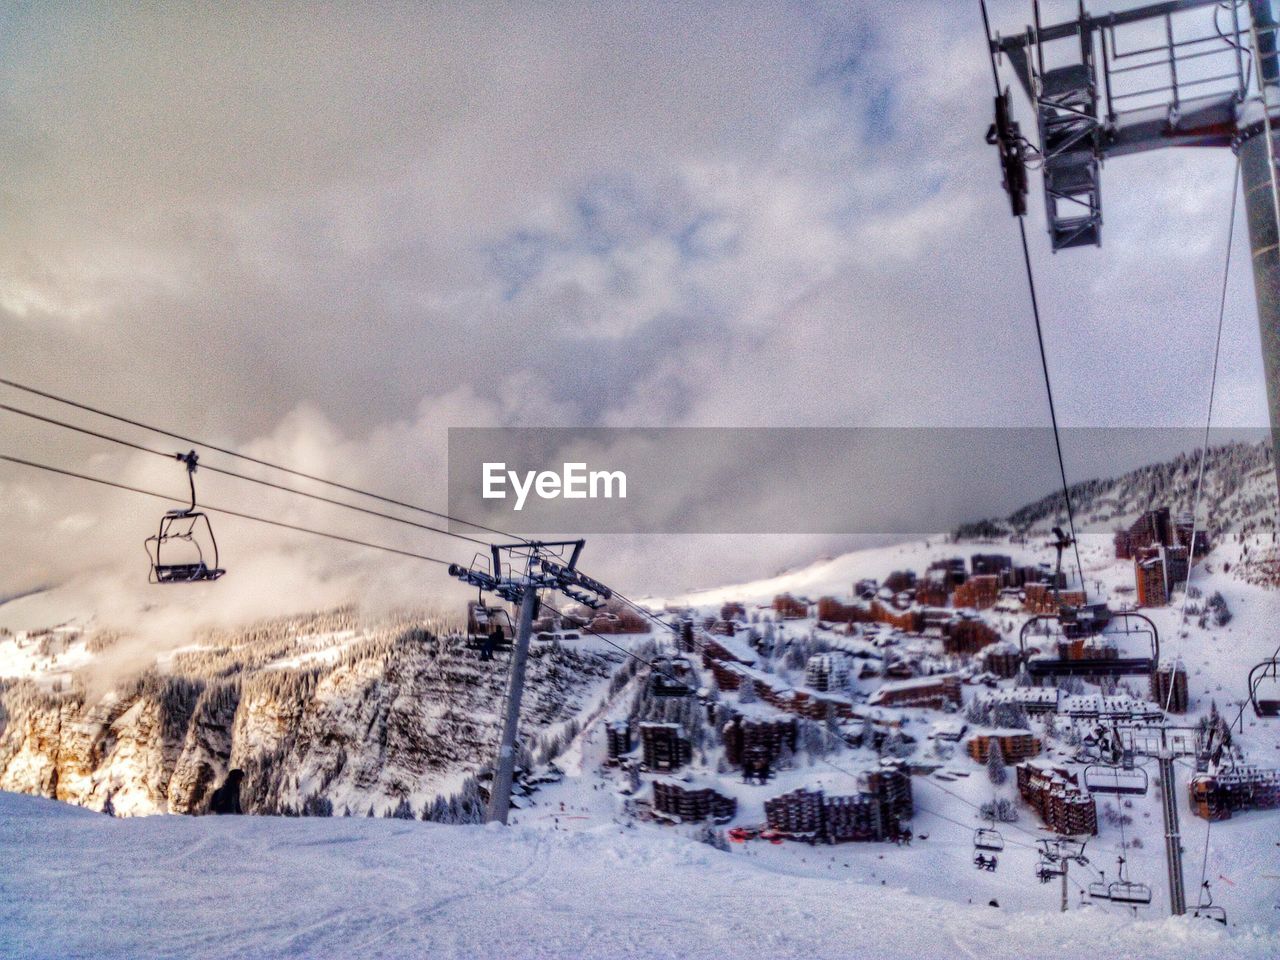 SKI LIFT OVER SNOW COVERED MOUNTAINS